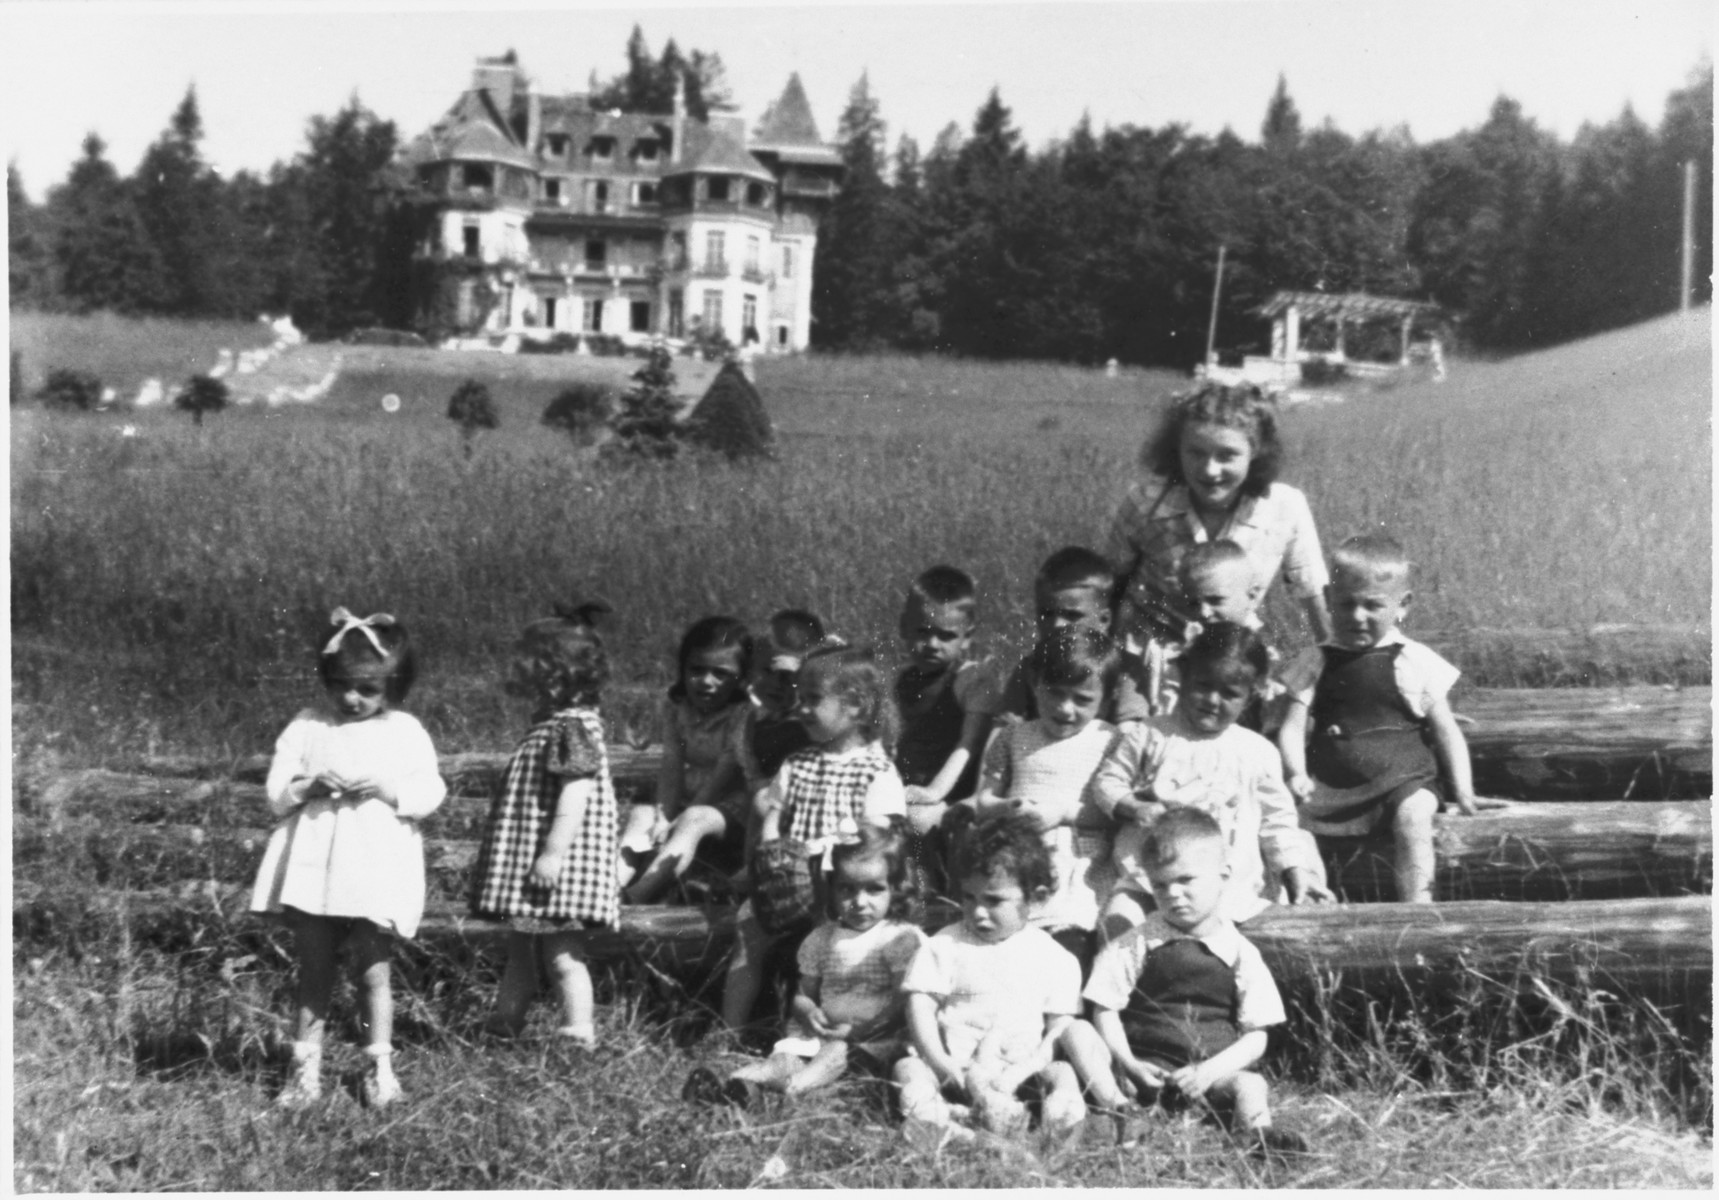 A half-Jewish teenage girl who survived the war in hiding poses with a group of the youngest children in the Chateau des Avenieres children's home in Cruseiles.

Pictured in the back right is Margot Schwarzschild.